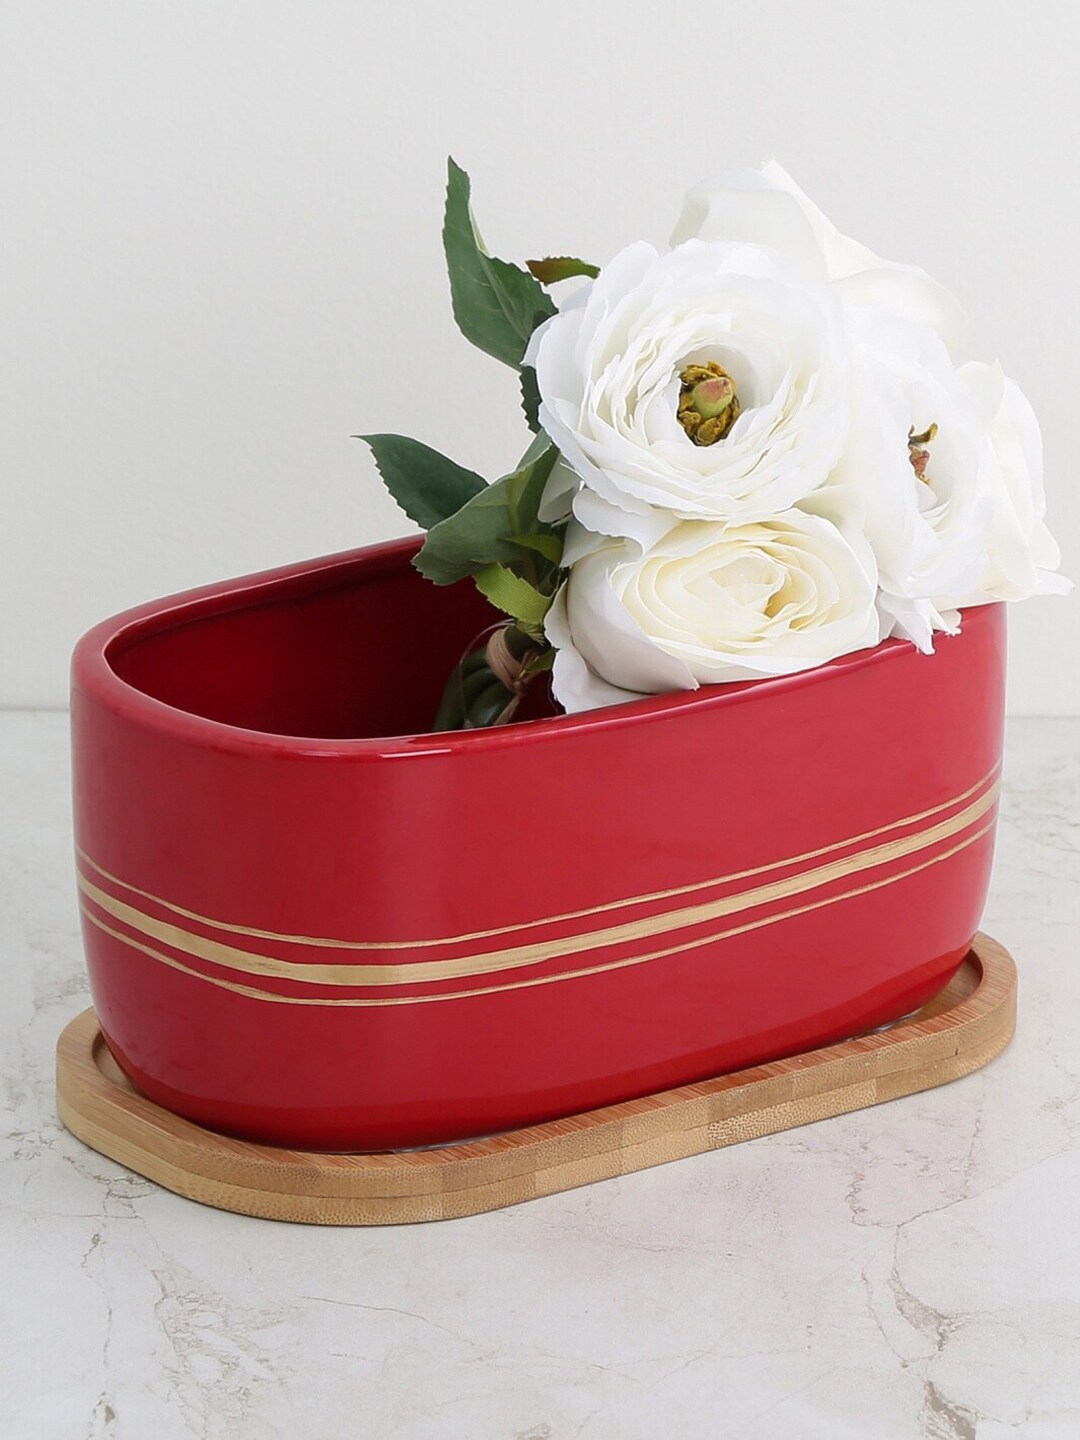 Homecentre Red Valencia Oval Planter With Wooden Base Price in India